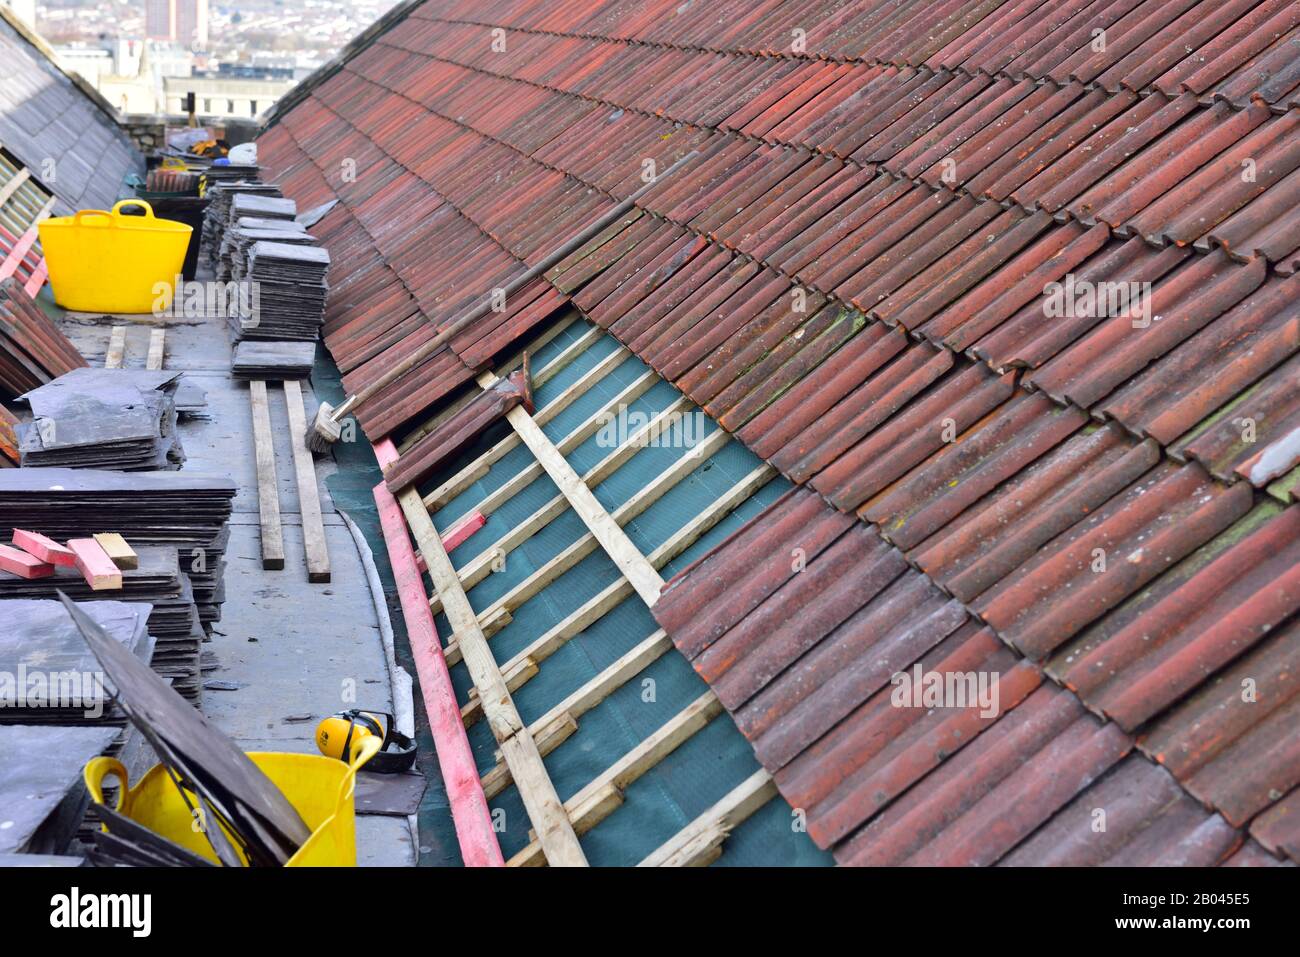 Tile and slate roof being rebuilt being rebuilt during building refurbishment, England, UK Stock Photo